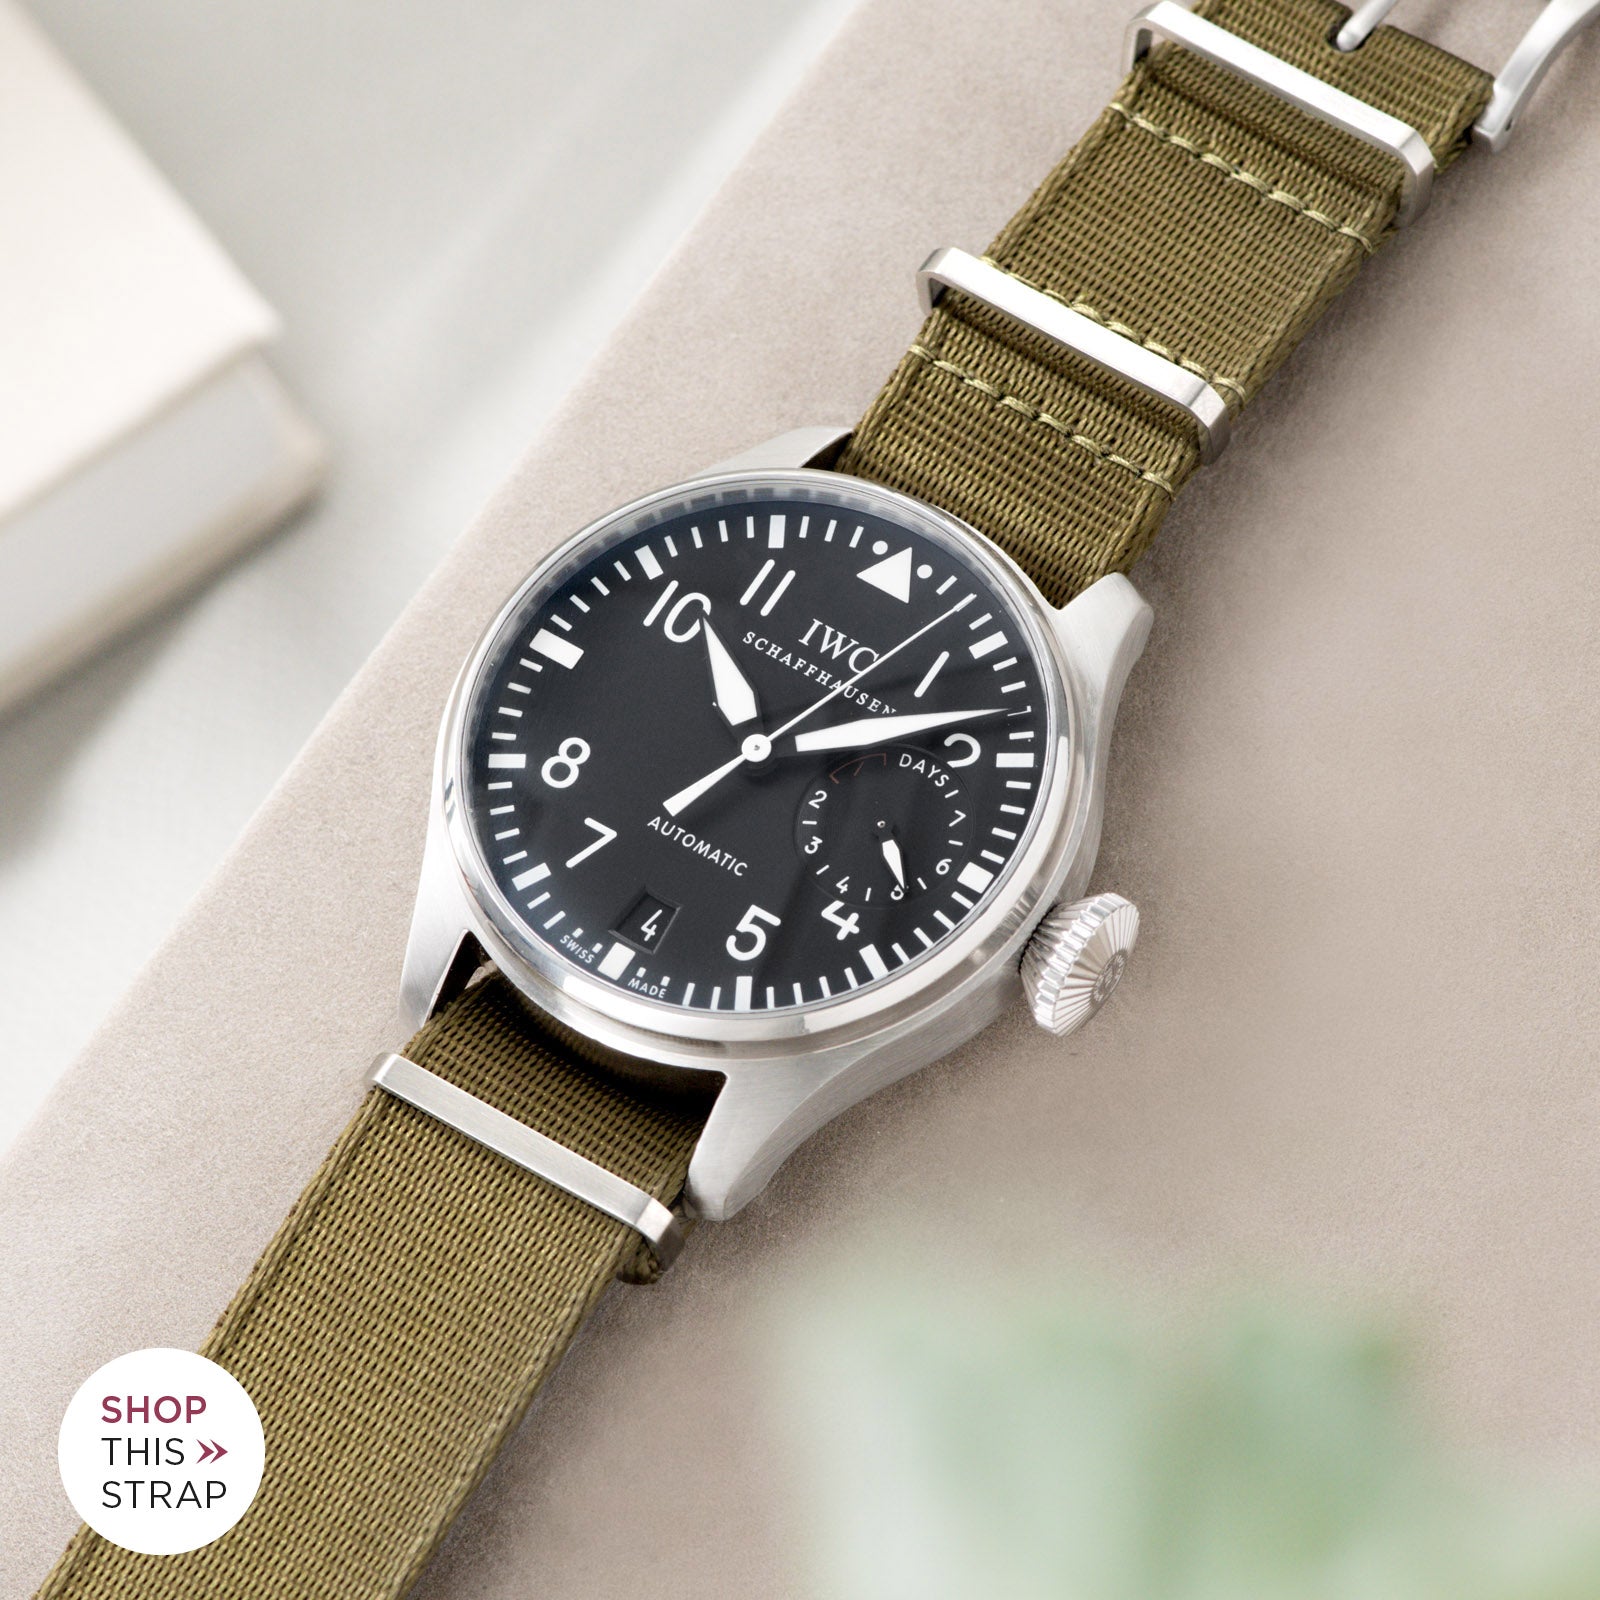 Bulang and Sons_Strap Guide_IWC Big Pilot Ref 5004_Deluxe Nylon Nato Watch Strap Olive Drab Green